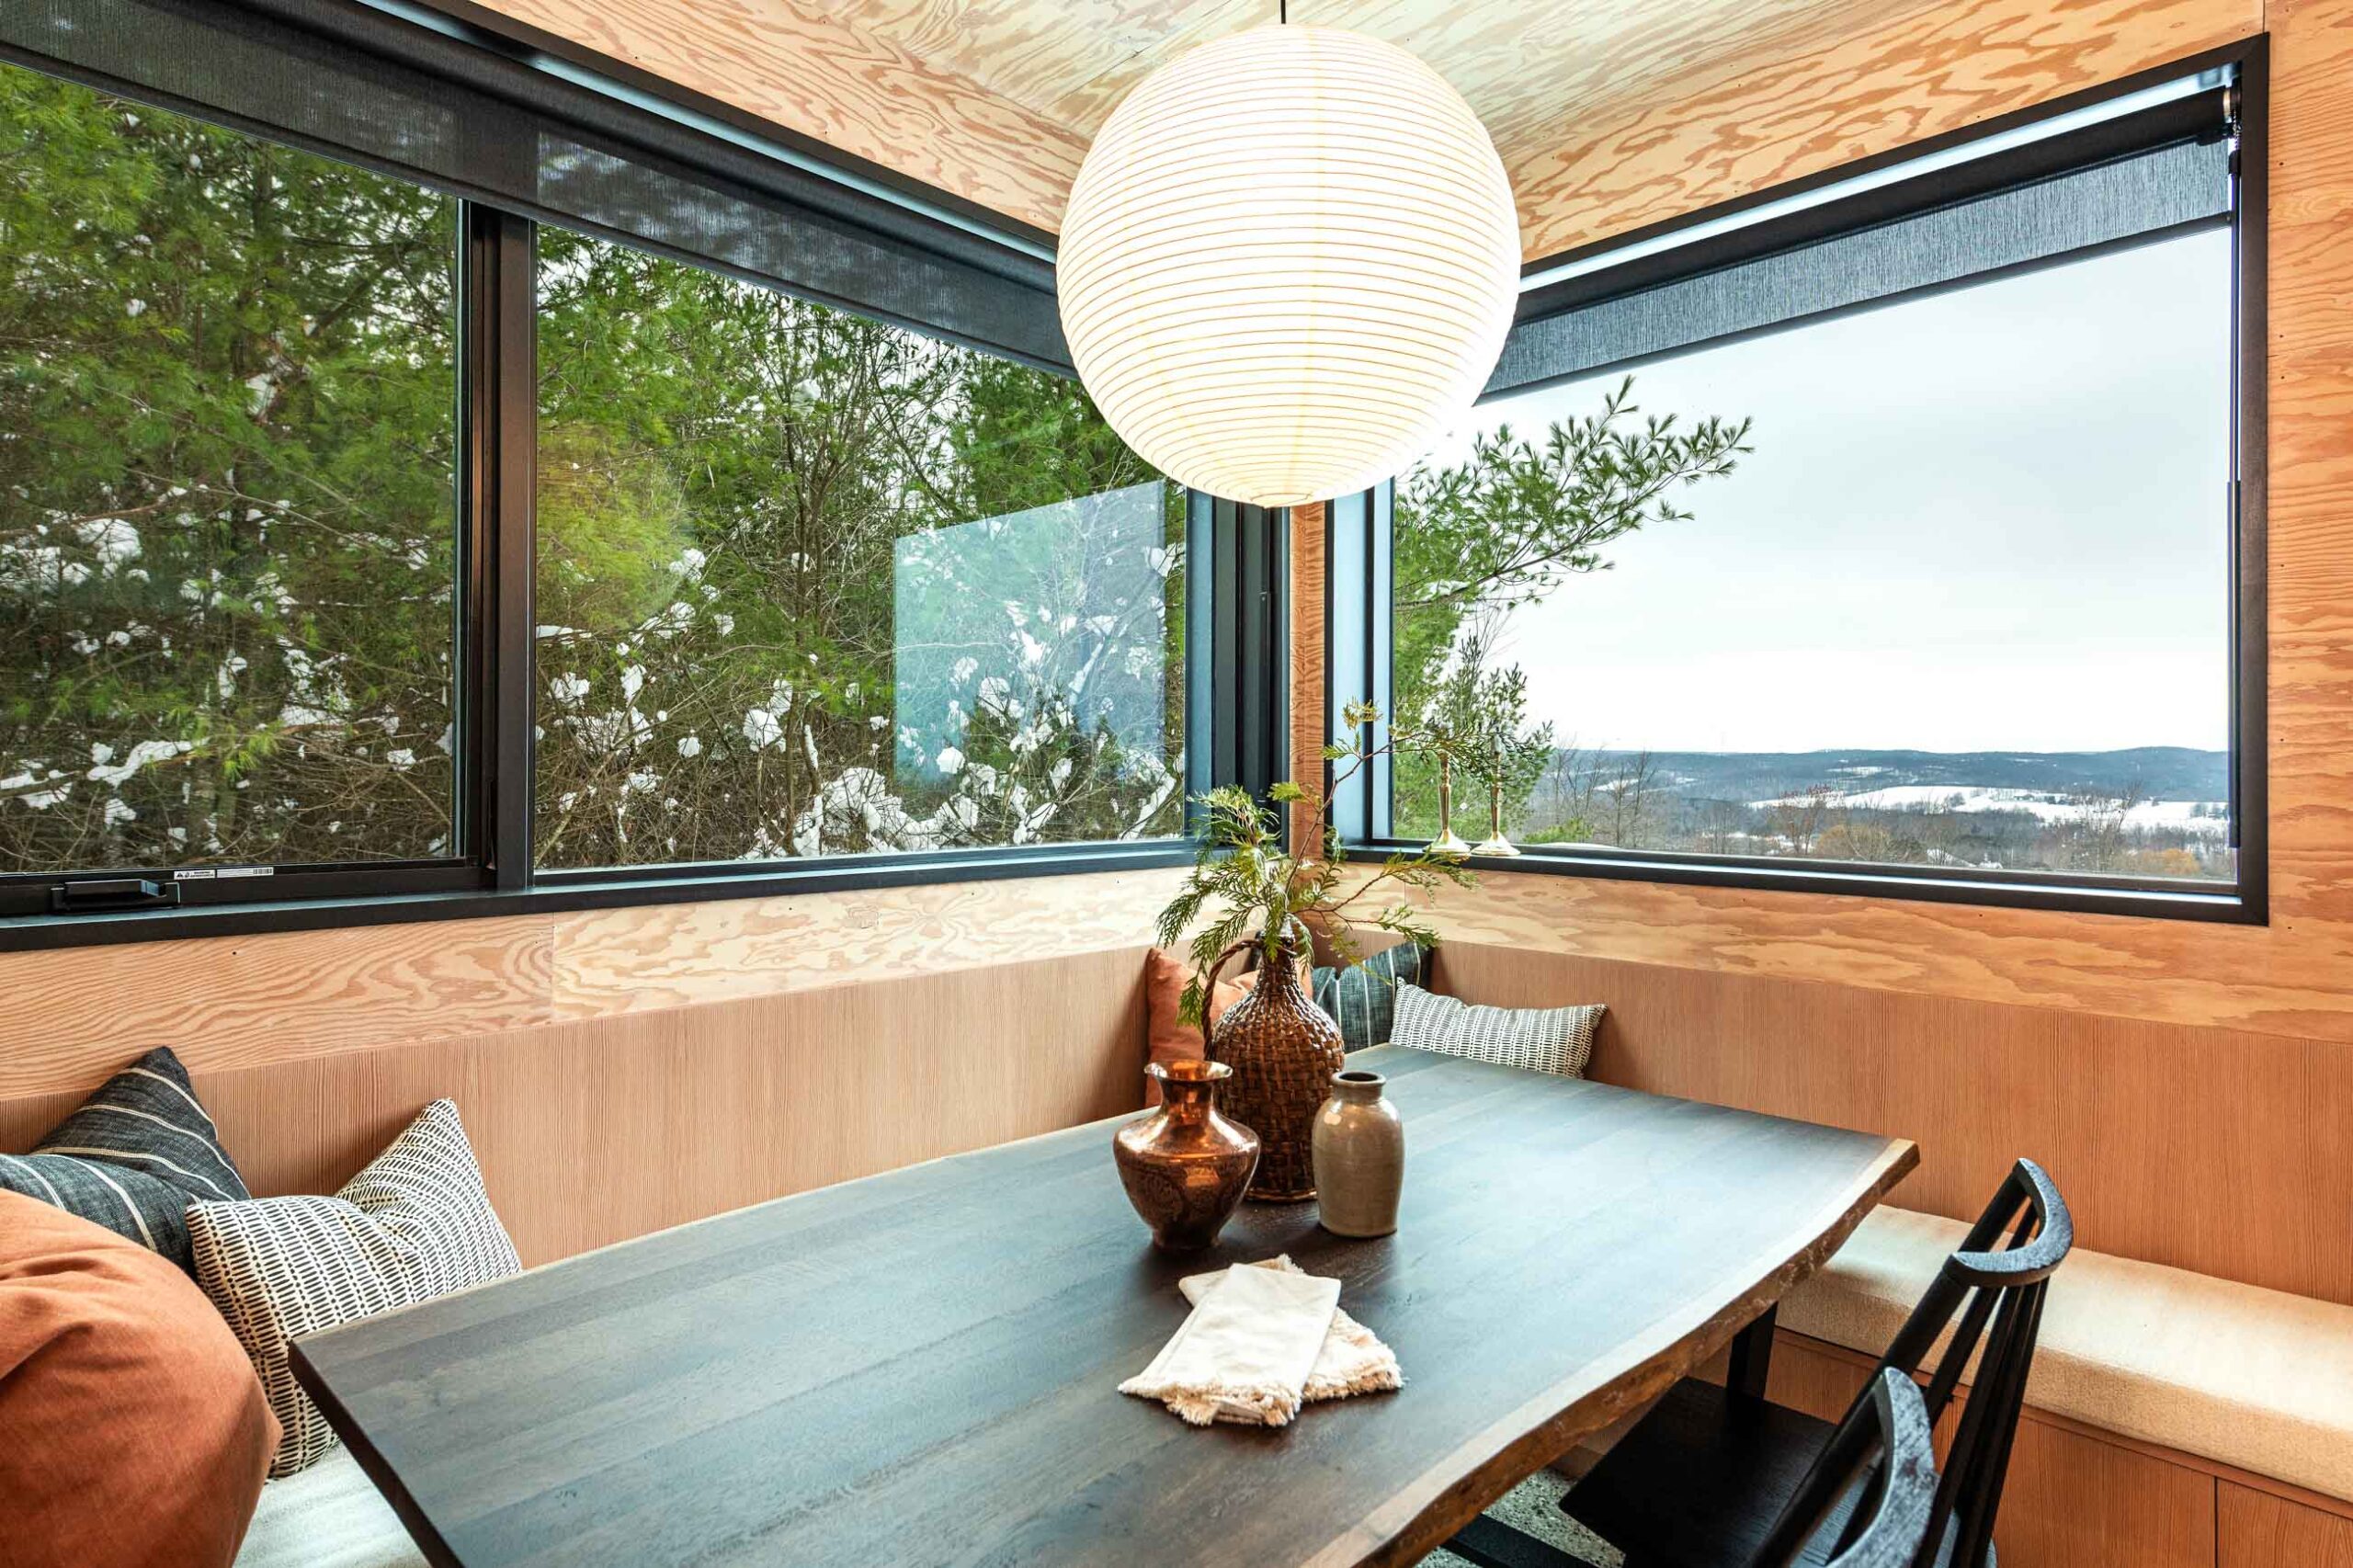 Dining nook detail of a Custom Scandi-style Cabin built by Blake Farrow Project Management Inc.